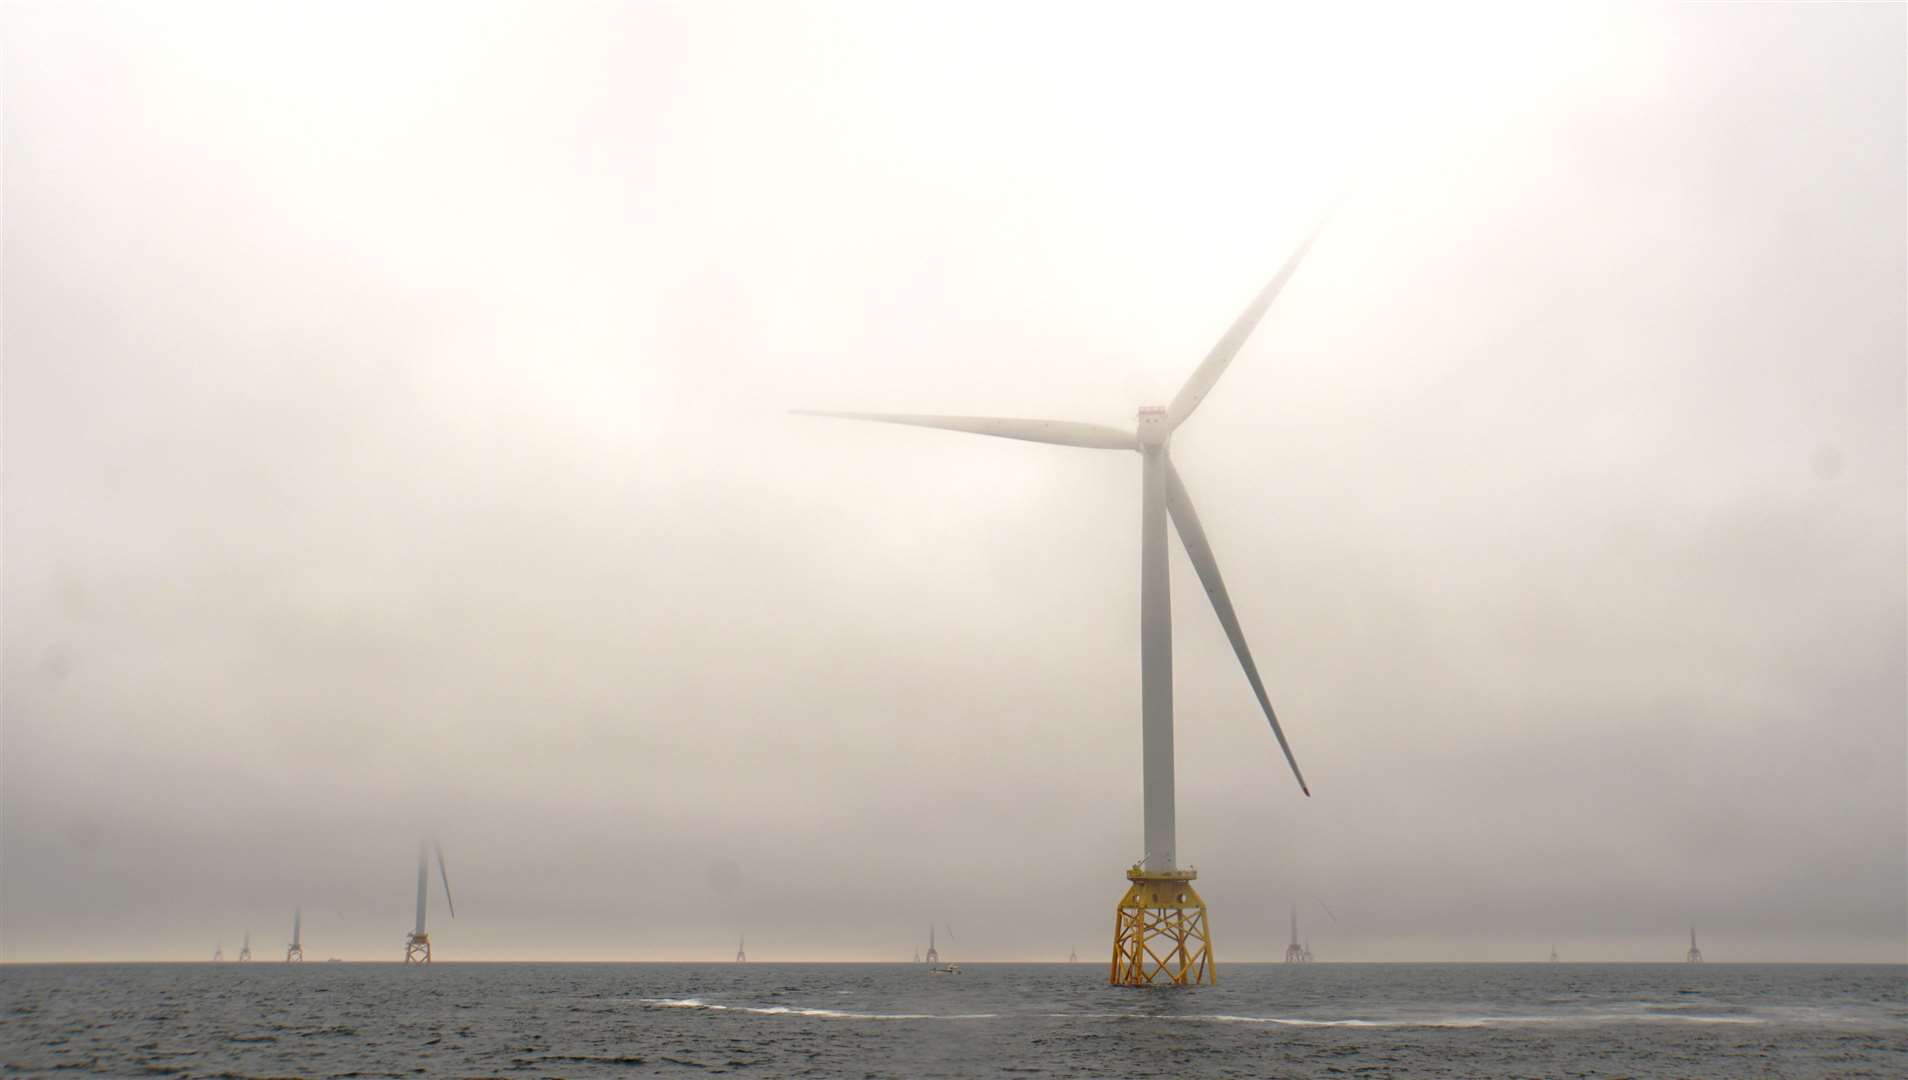 The launch of the new offshore power group signals new ambitions for the sector.